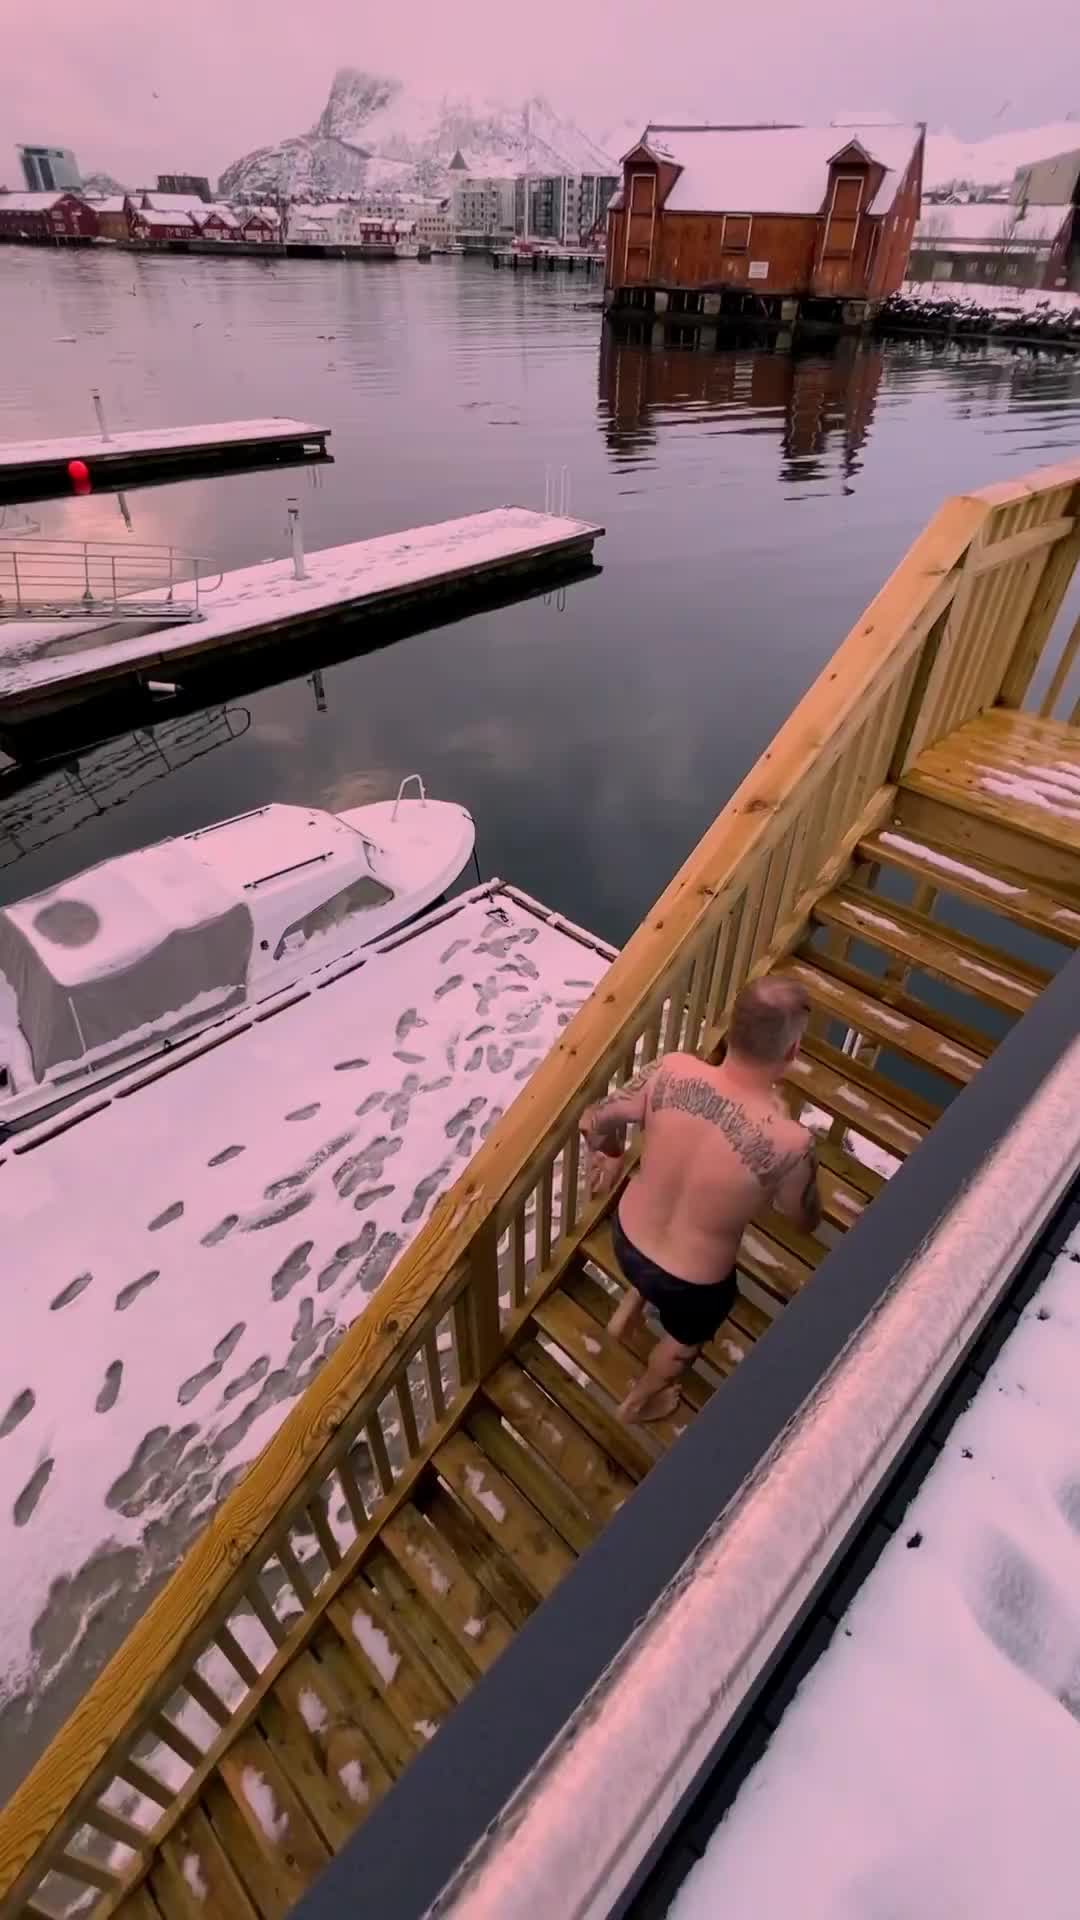 Brave Enough? Jump into Norway's Freezing Waters!